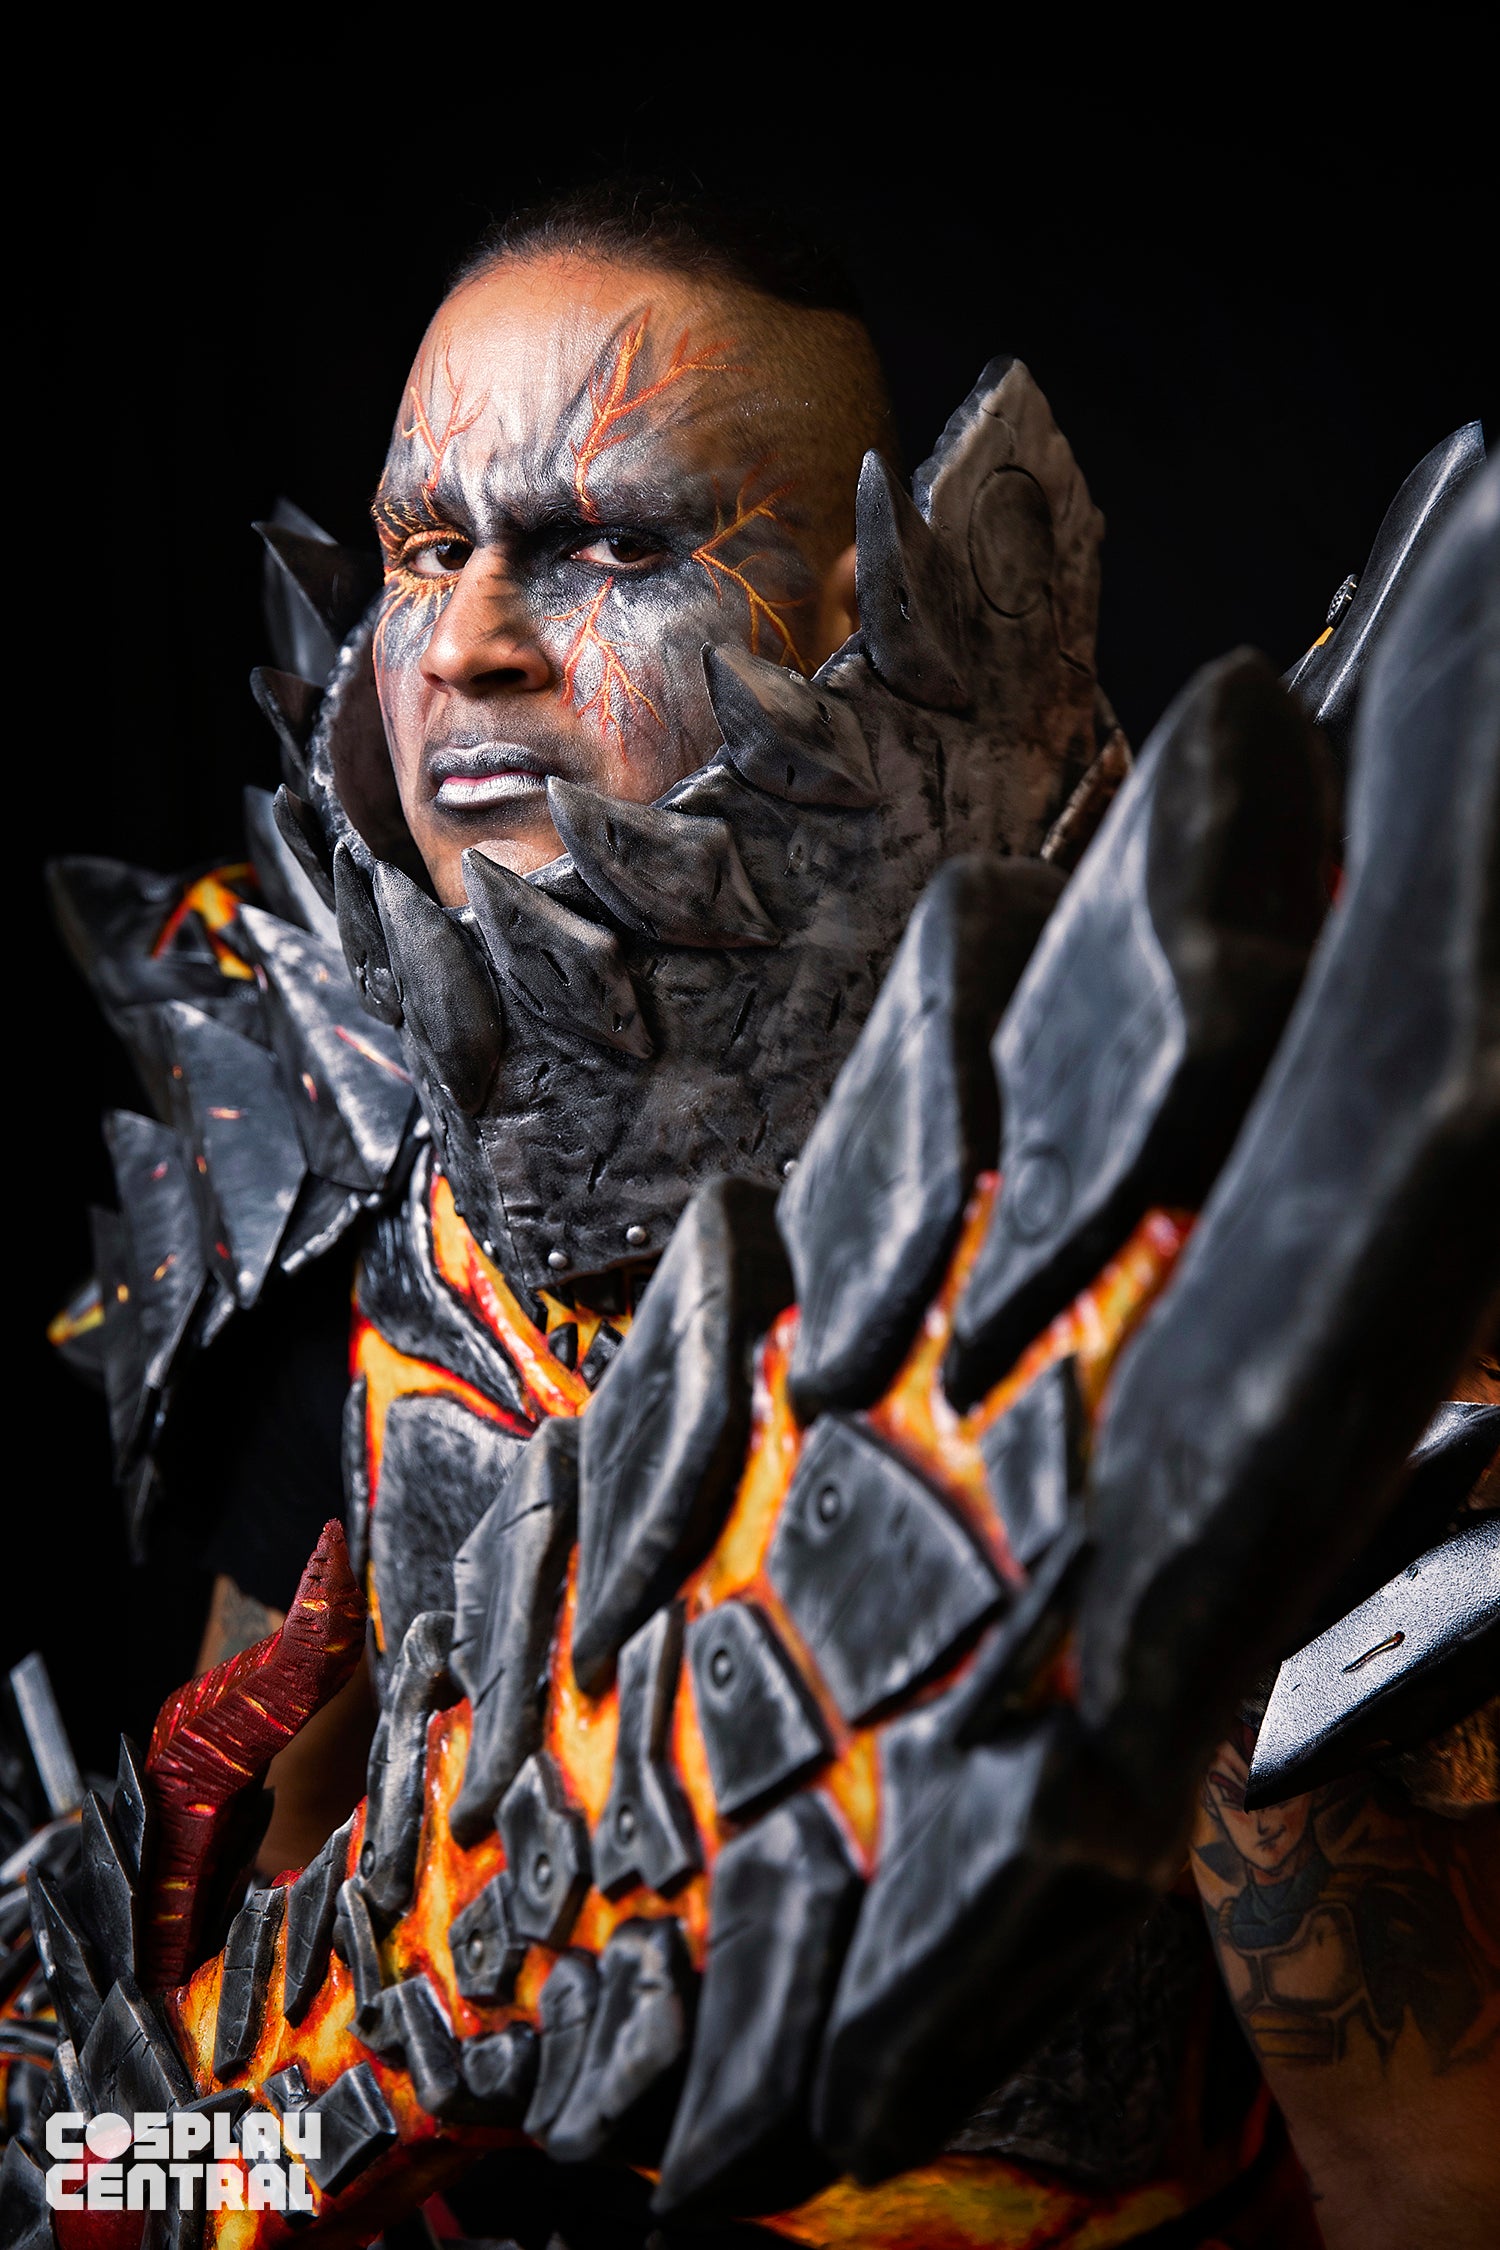 Warheart Cosplay as Deathwing from World of Warcraft